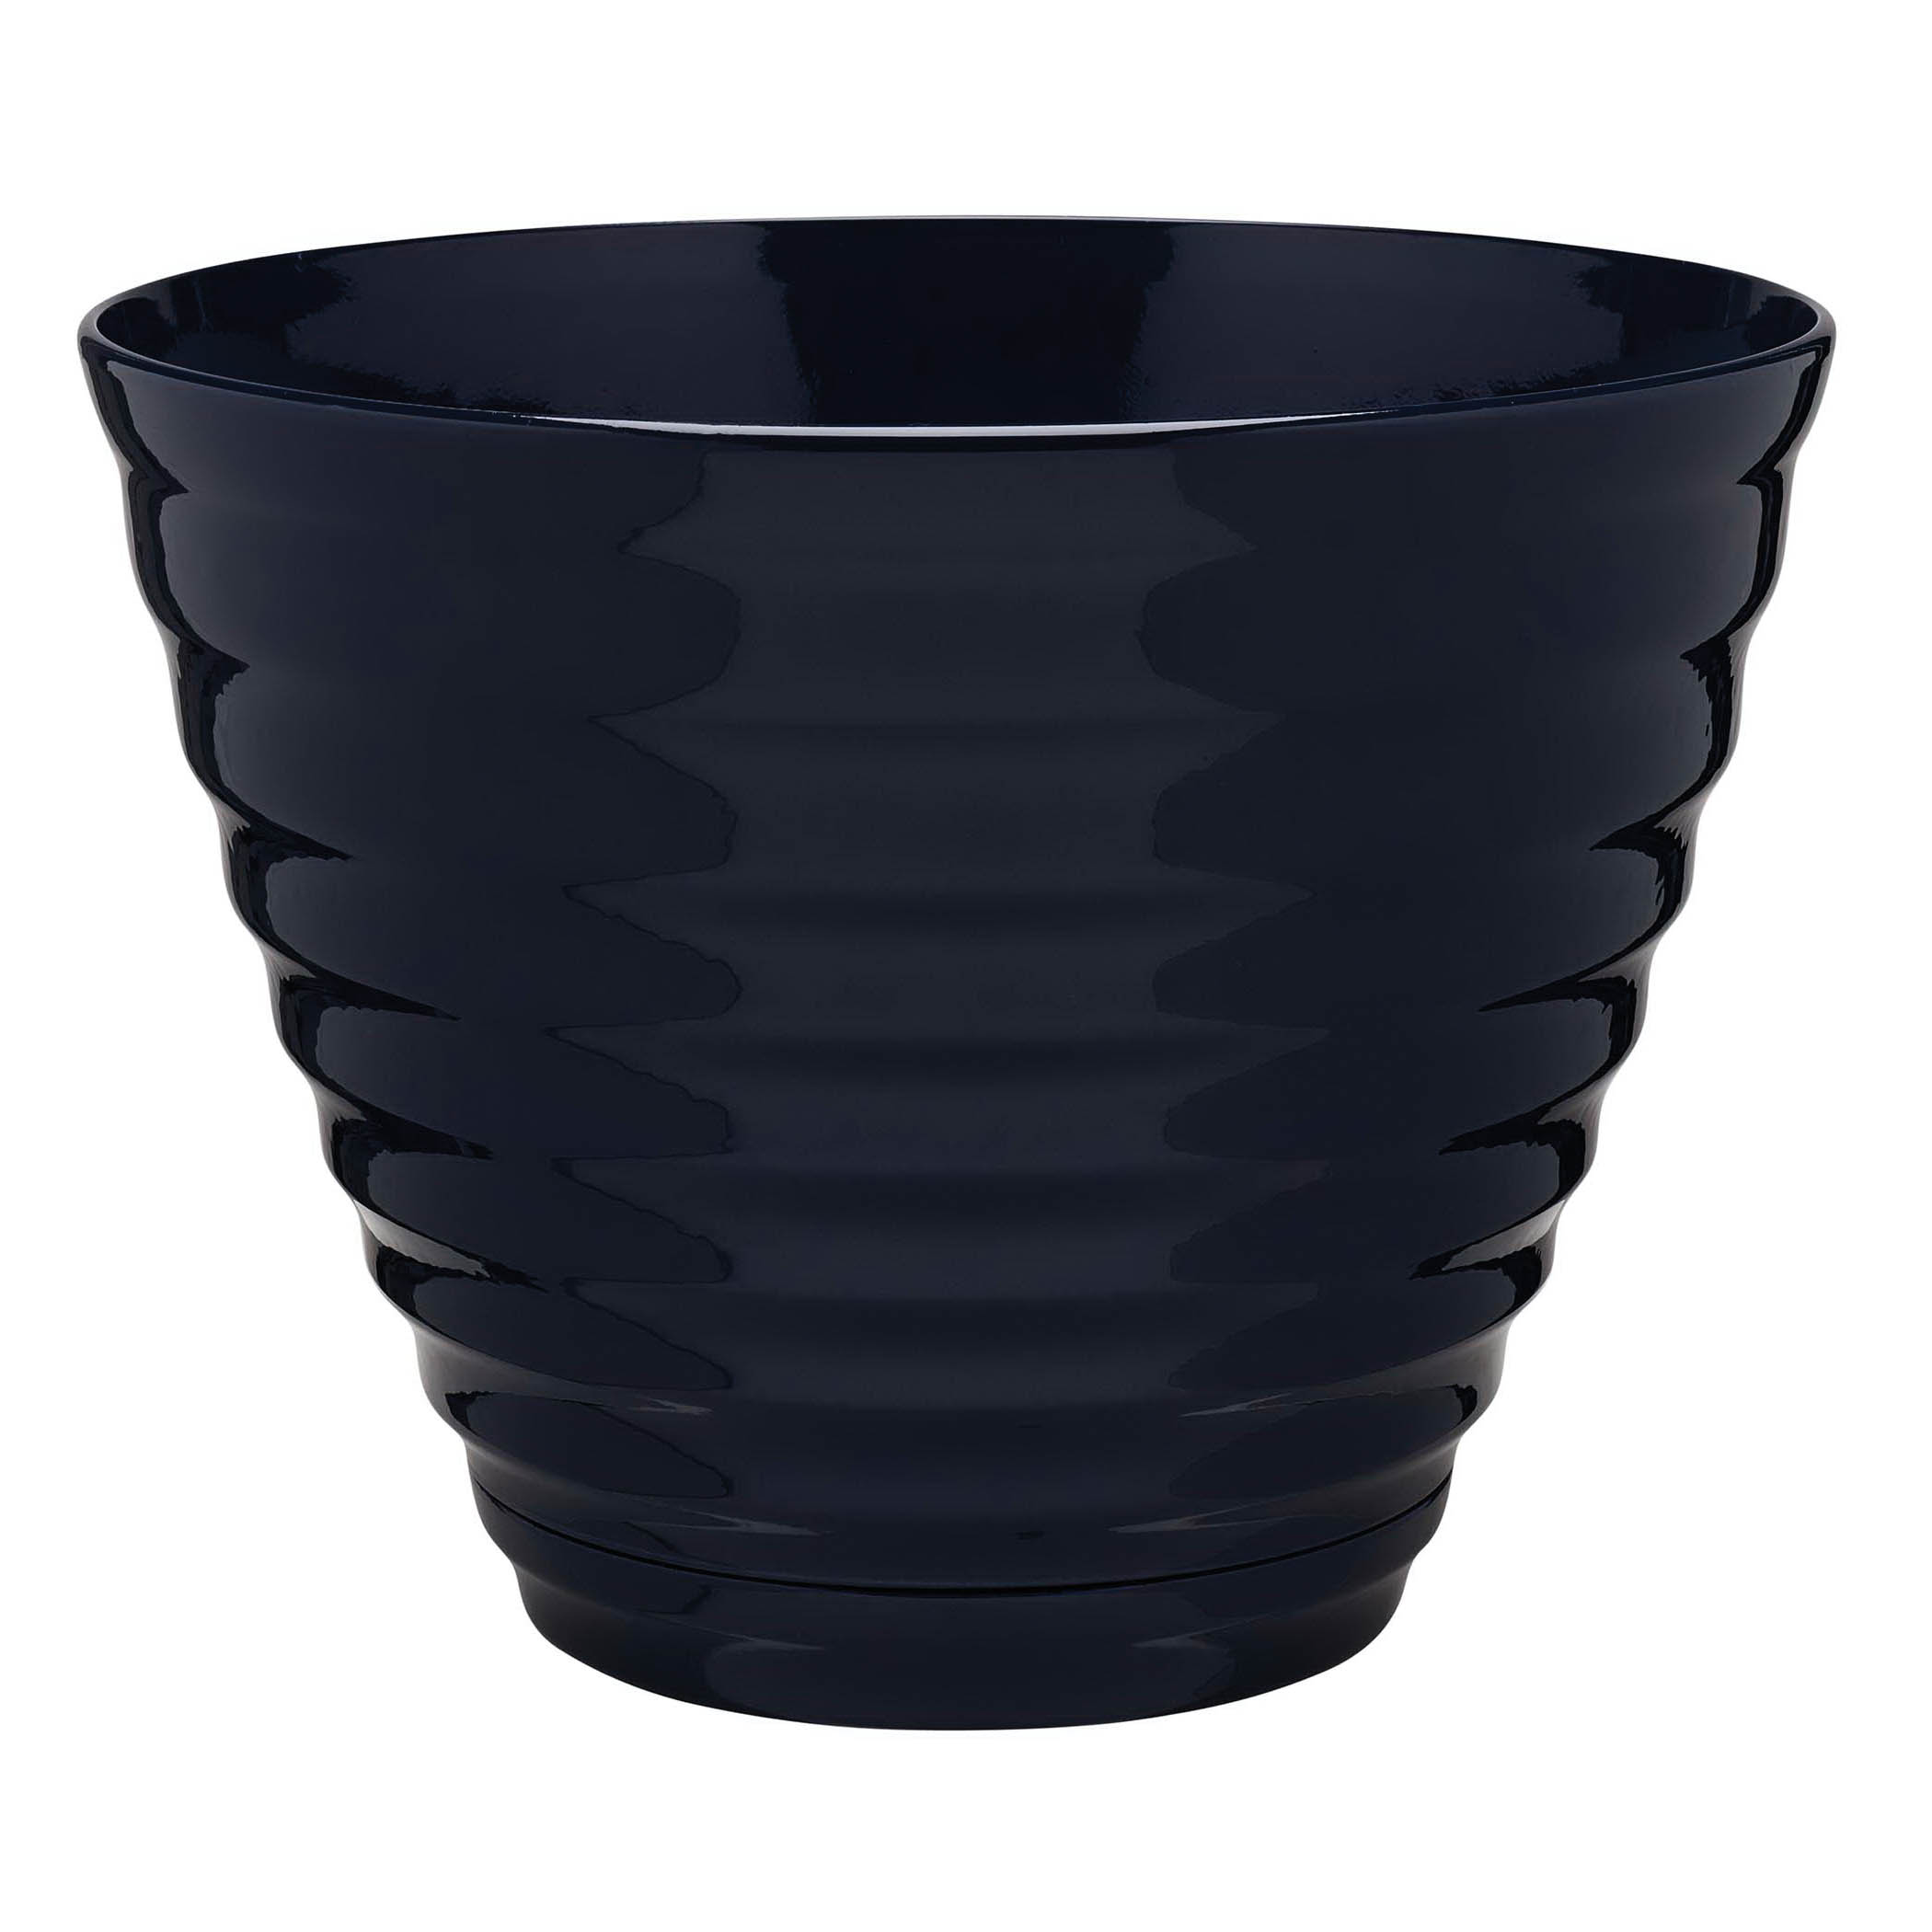 HDR-064770 Planter, 15.9 in Dia, 12.3 in H, Round, Beehive Design, Resin, Navy